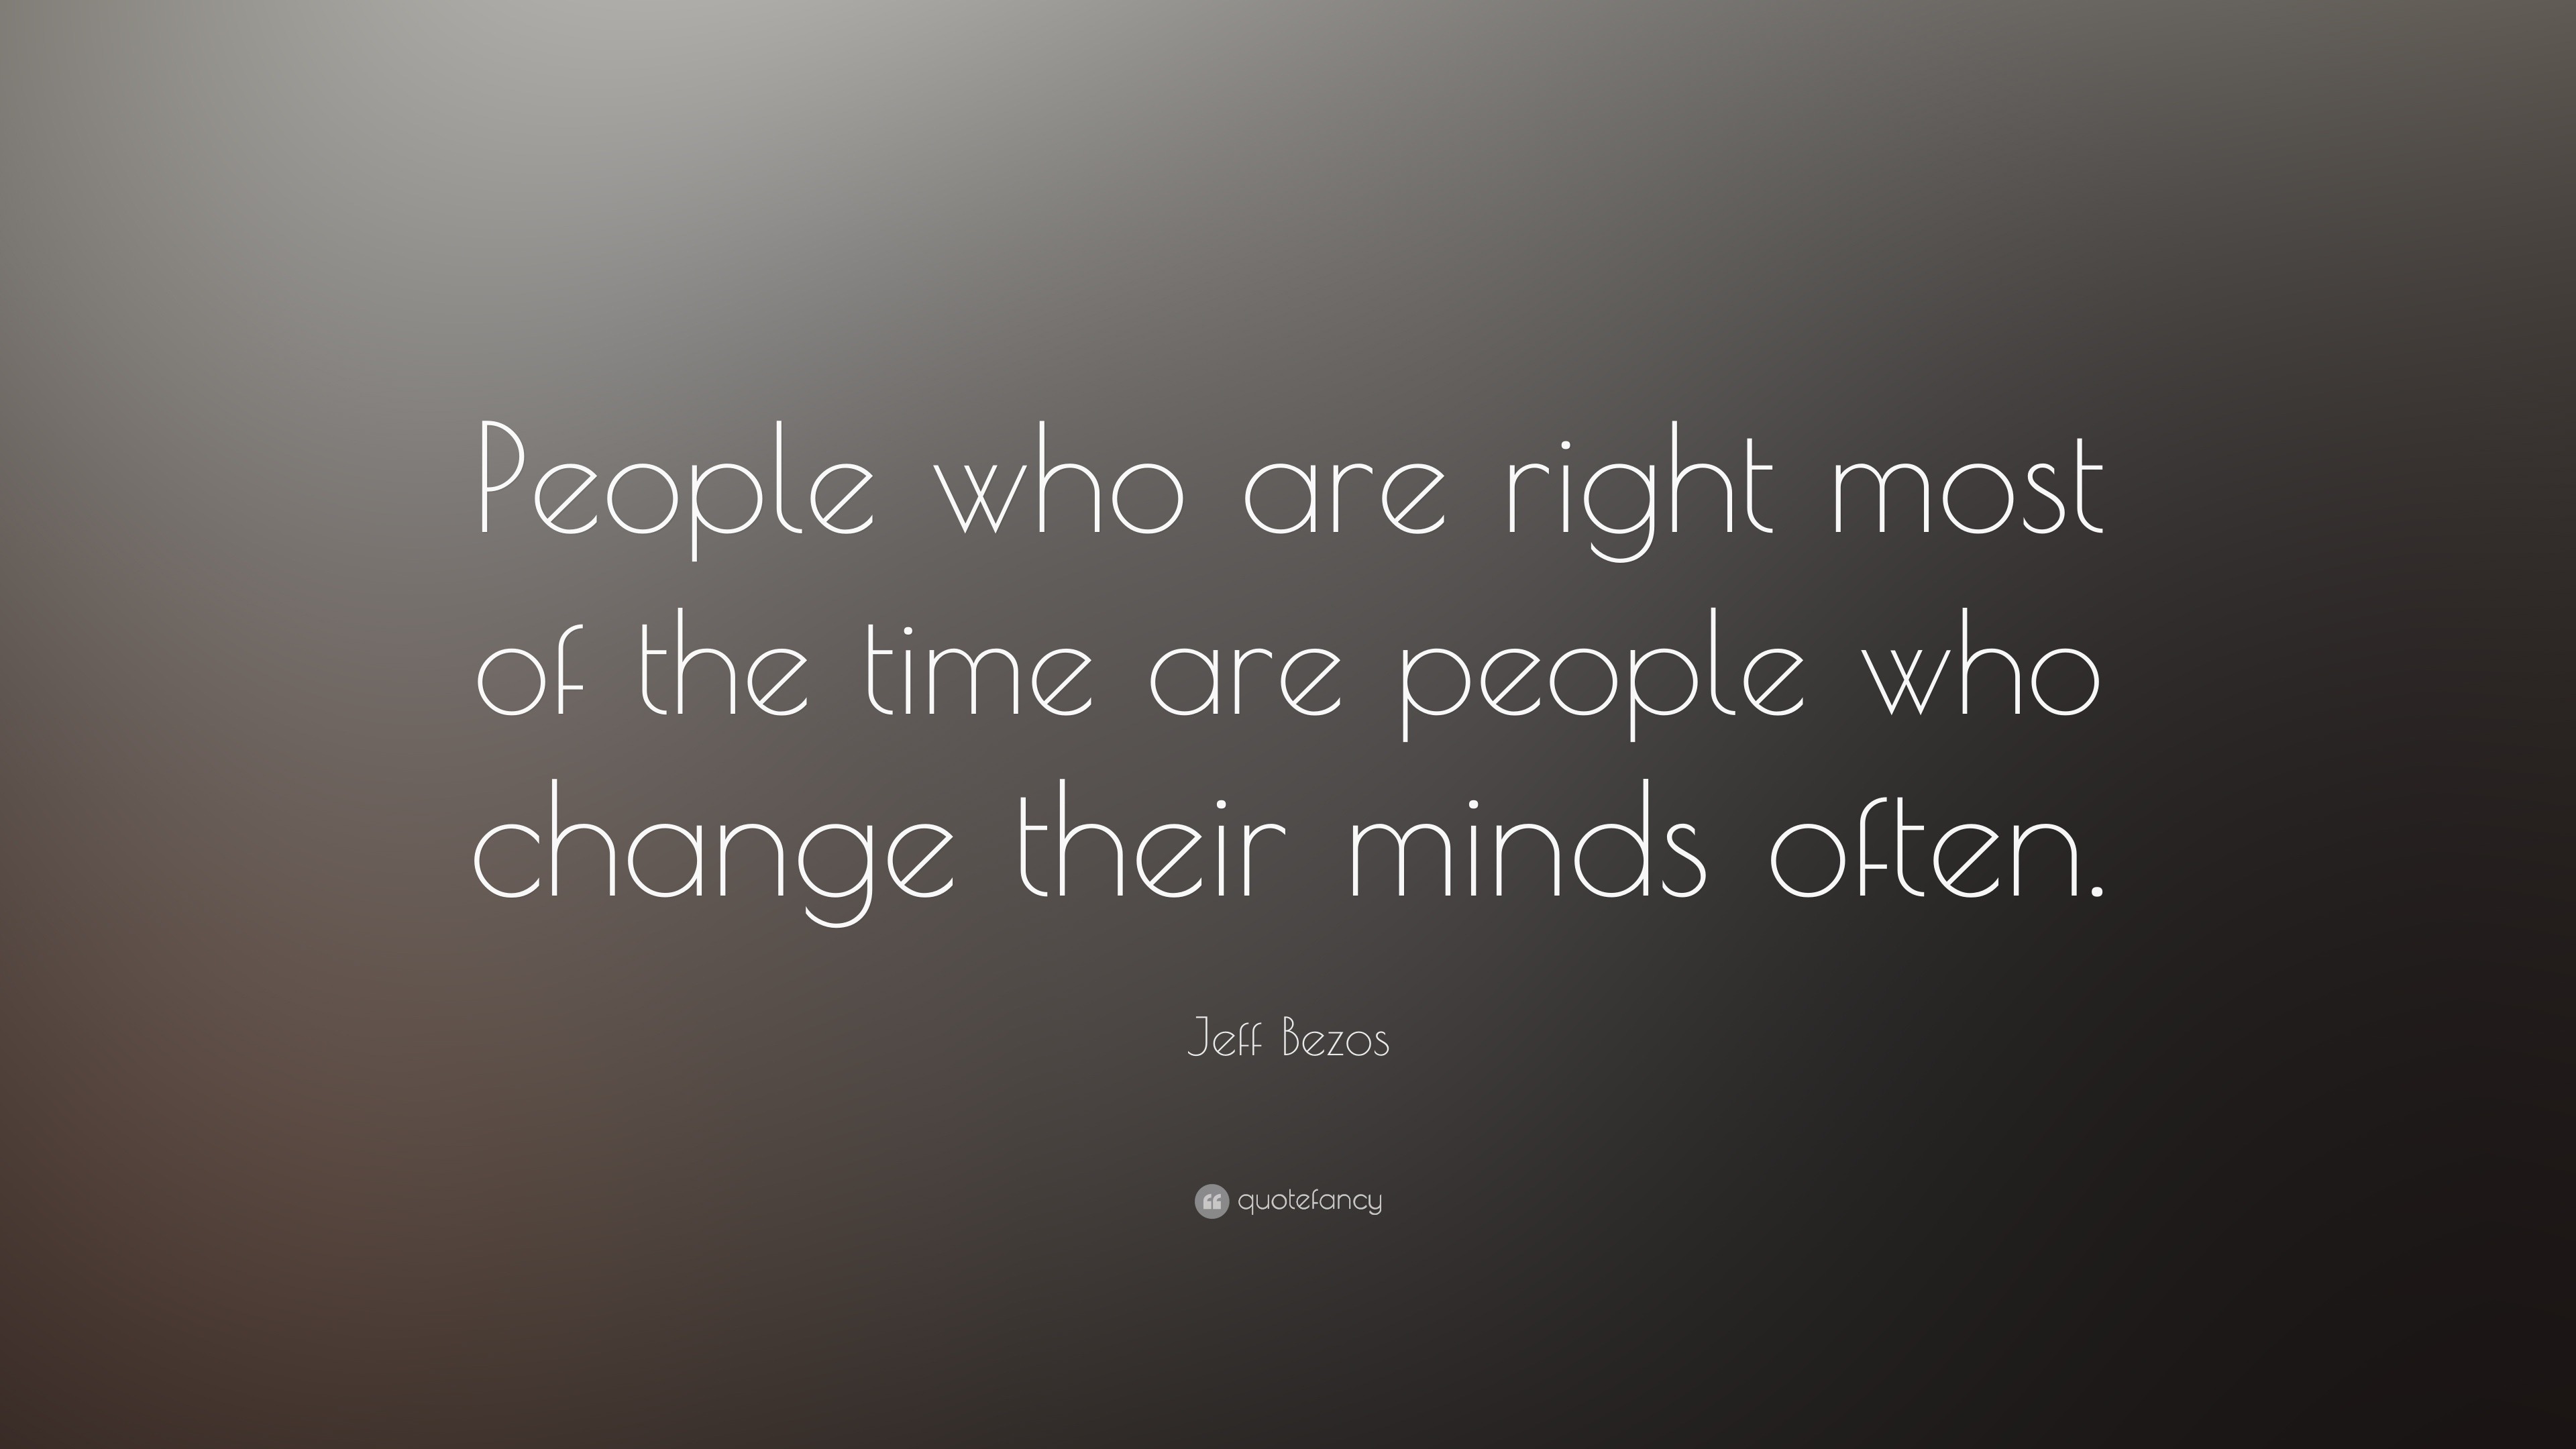 Jeff Bezos Quote: “People who are right most of the time are people who ...